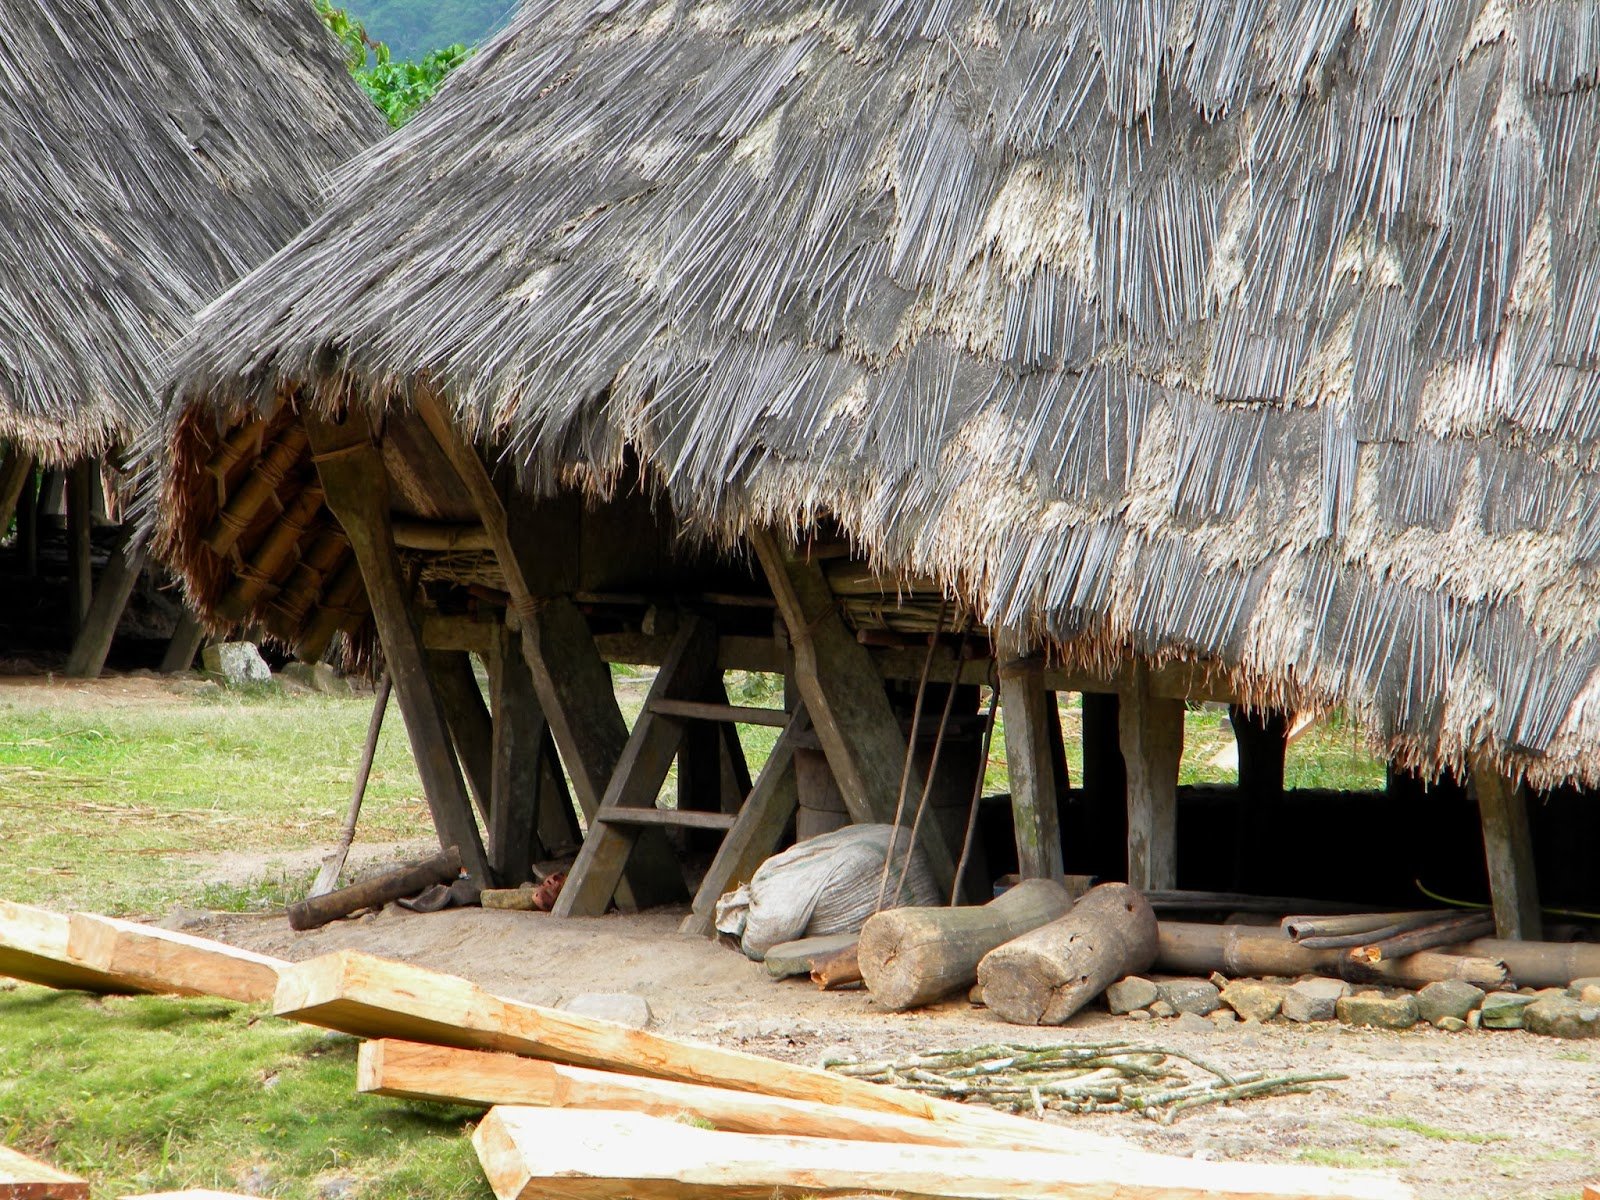 Huts in Wae Rebo, recently repaired thanks to a revolutionary ecotourism programme.